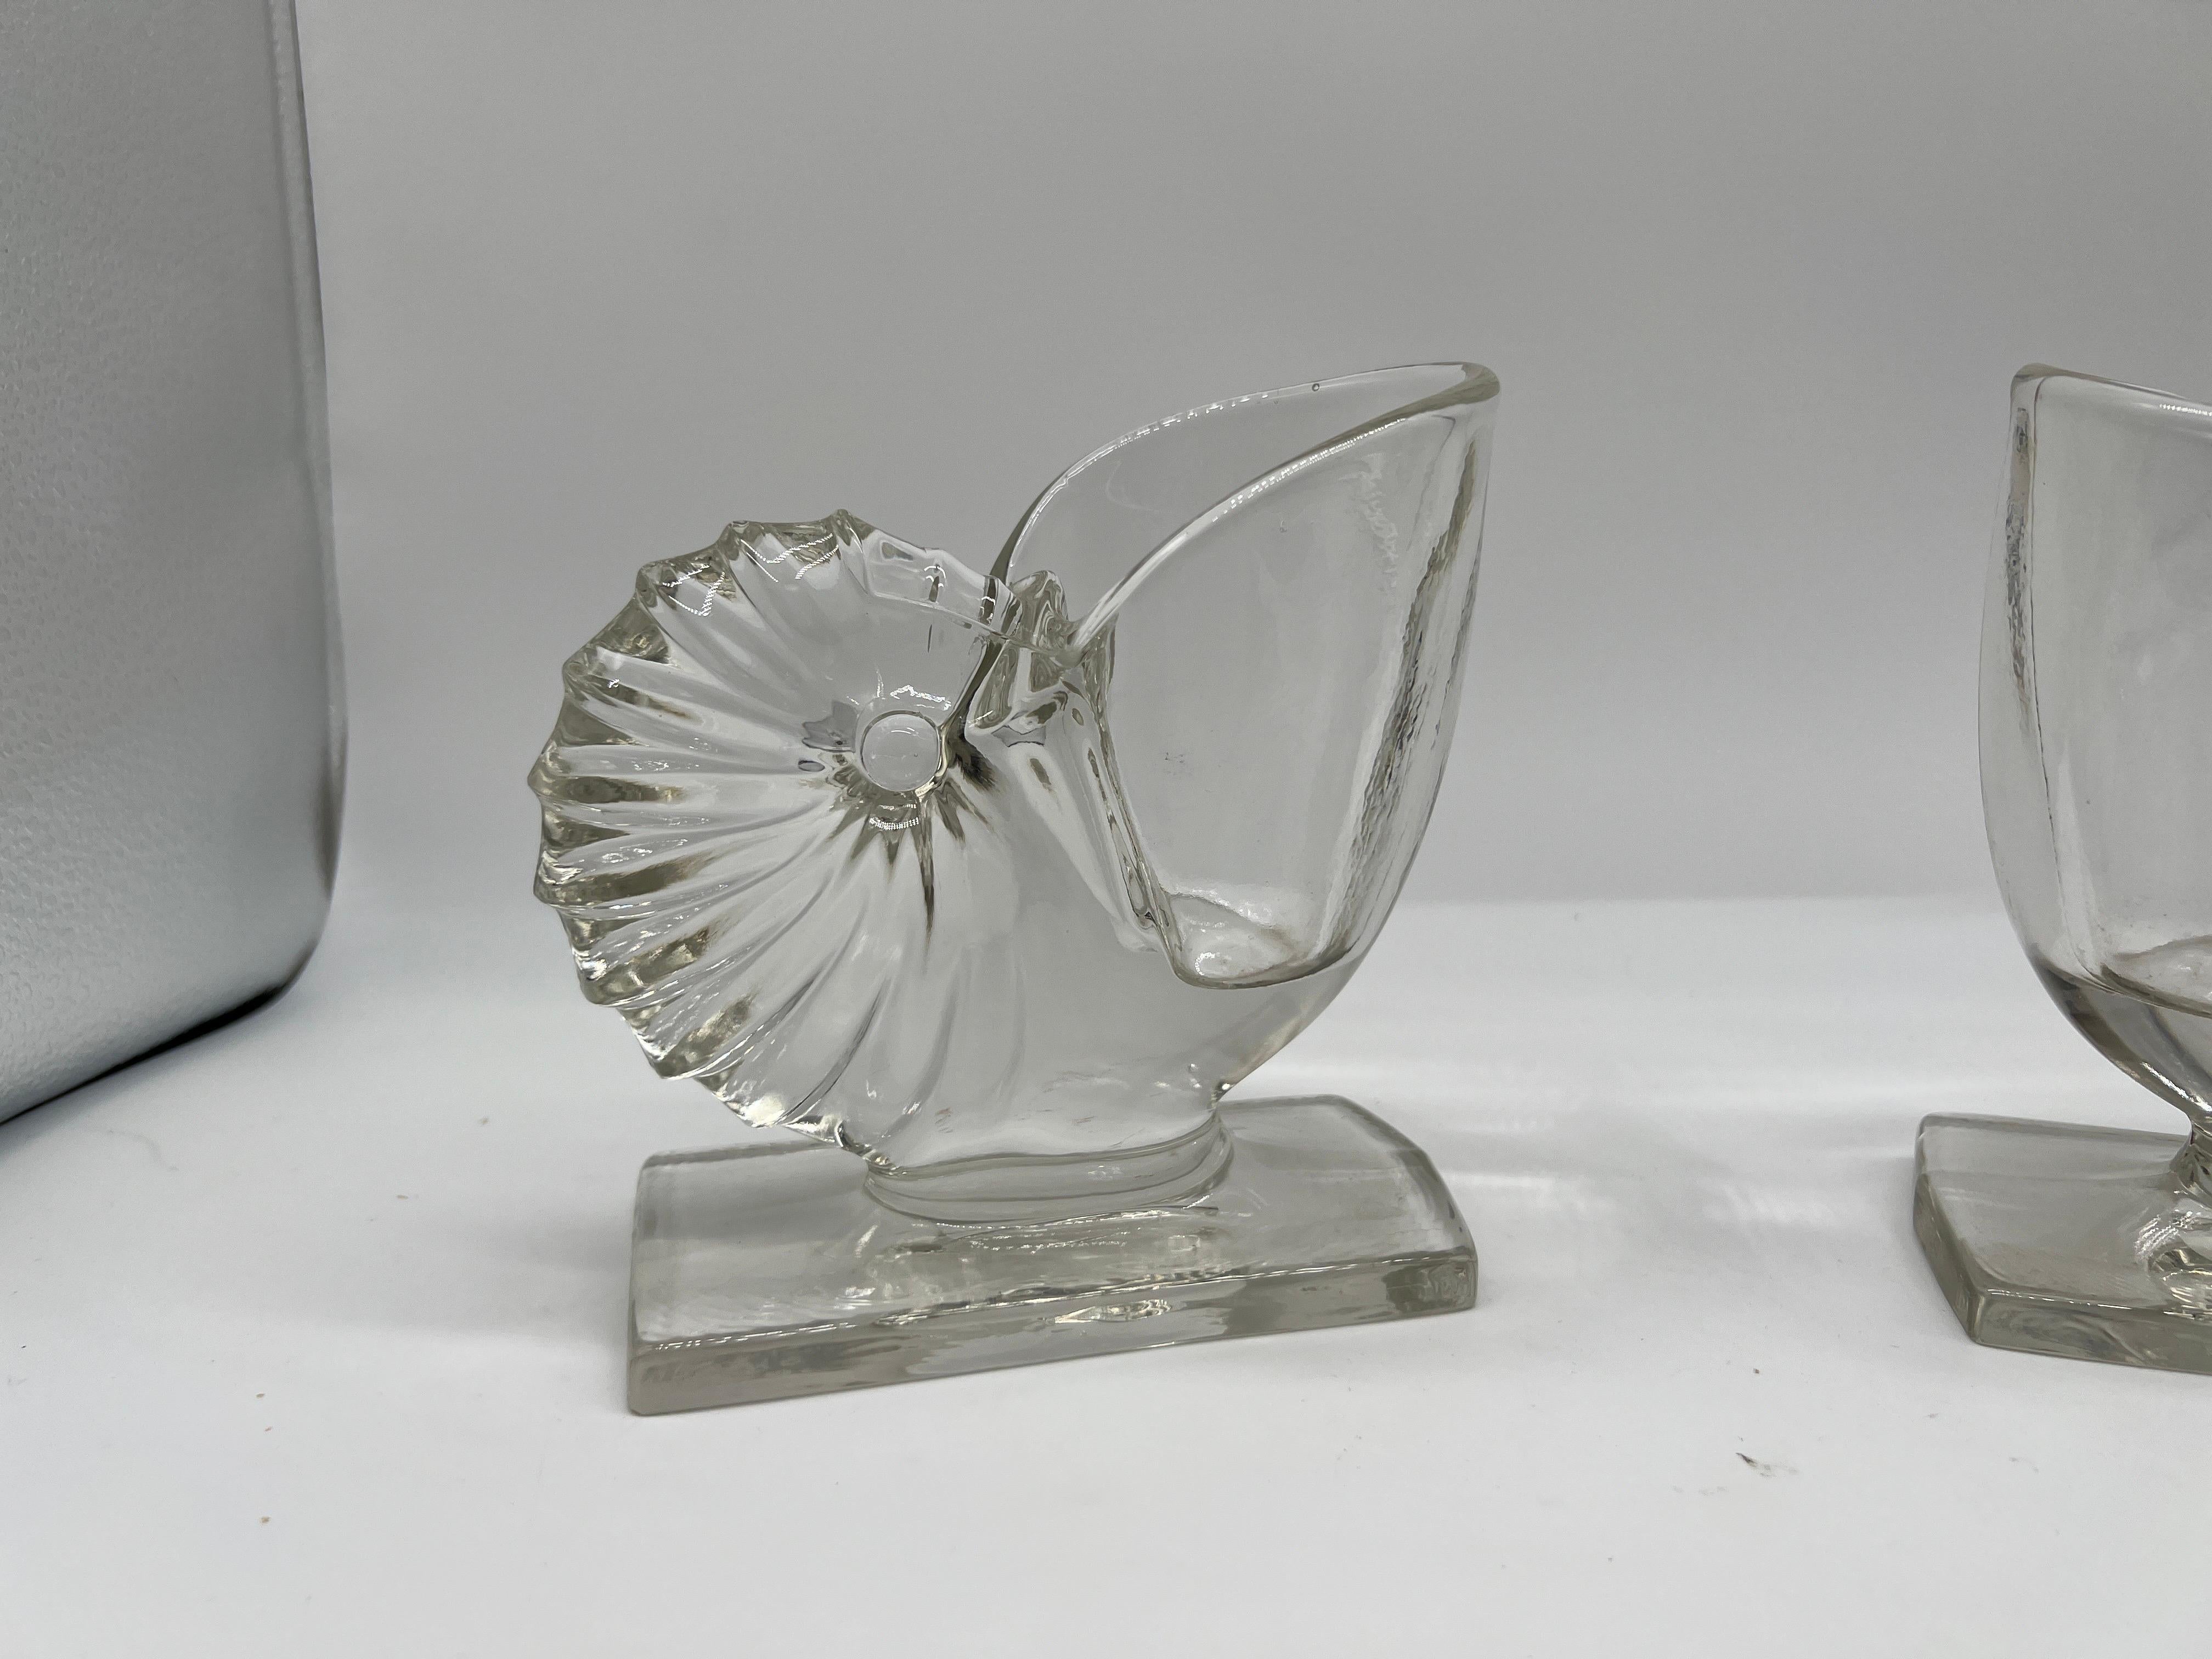 American, circa 1950.

A pair of vintage clear glass nautilus shell book ends or vases. They would be perfect for a pair of succulent plants!

